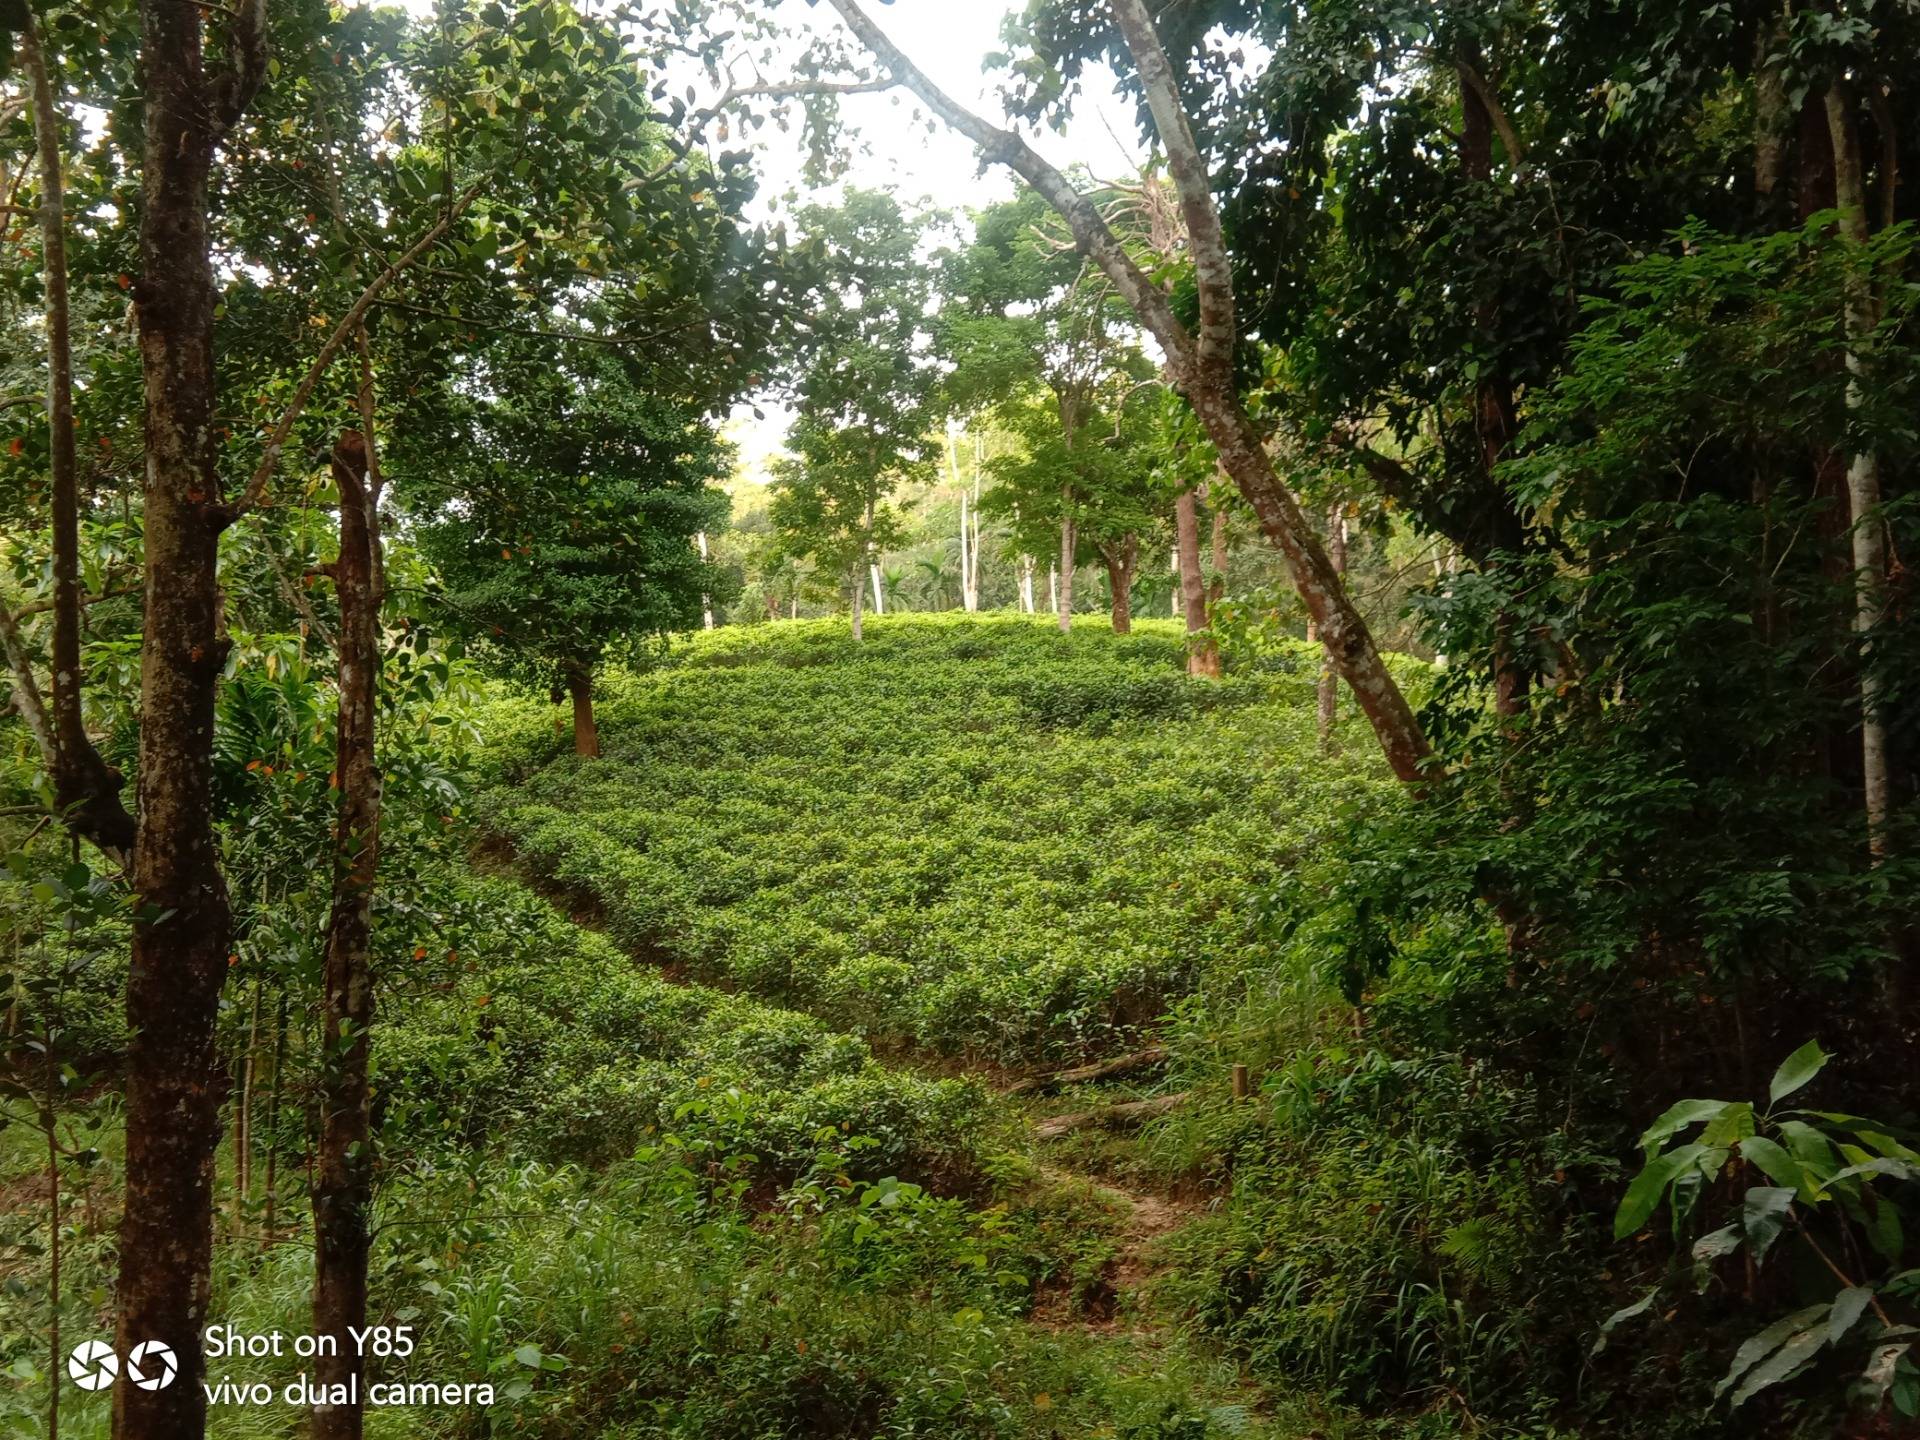 A visit to the Kottawa forest that brings refreshment and coolness in Sri Lanka...